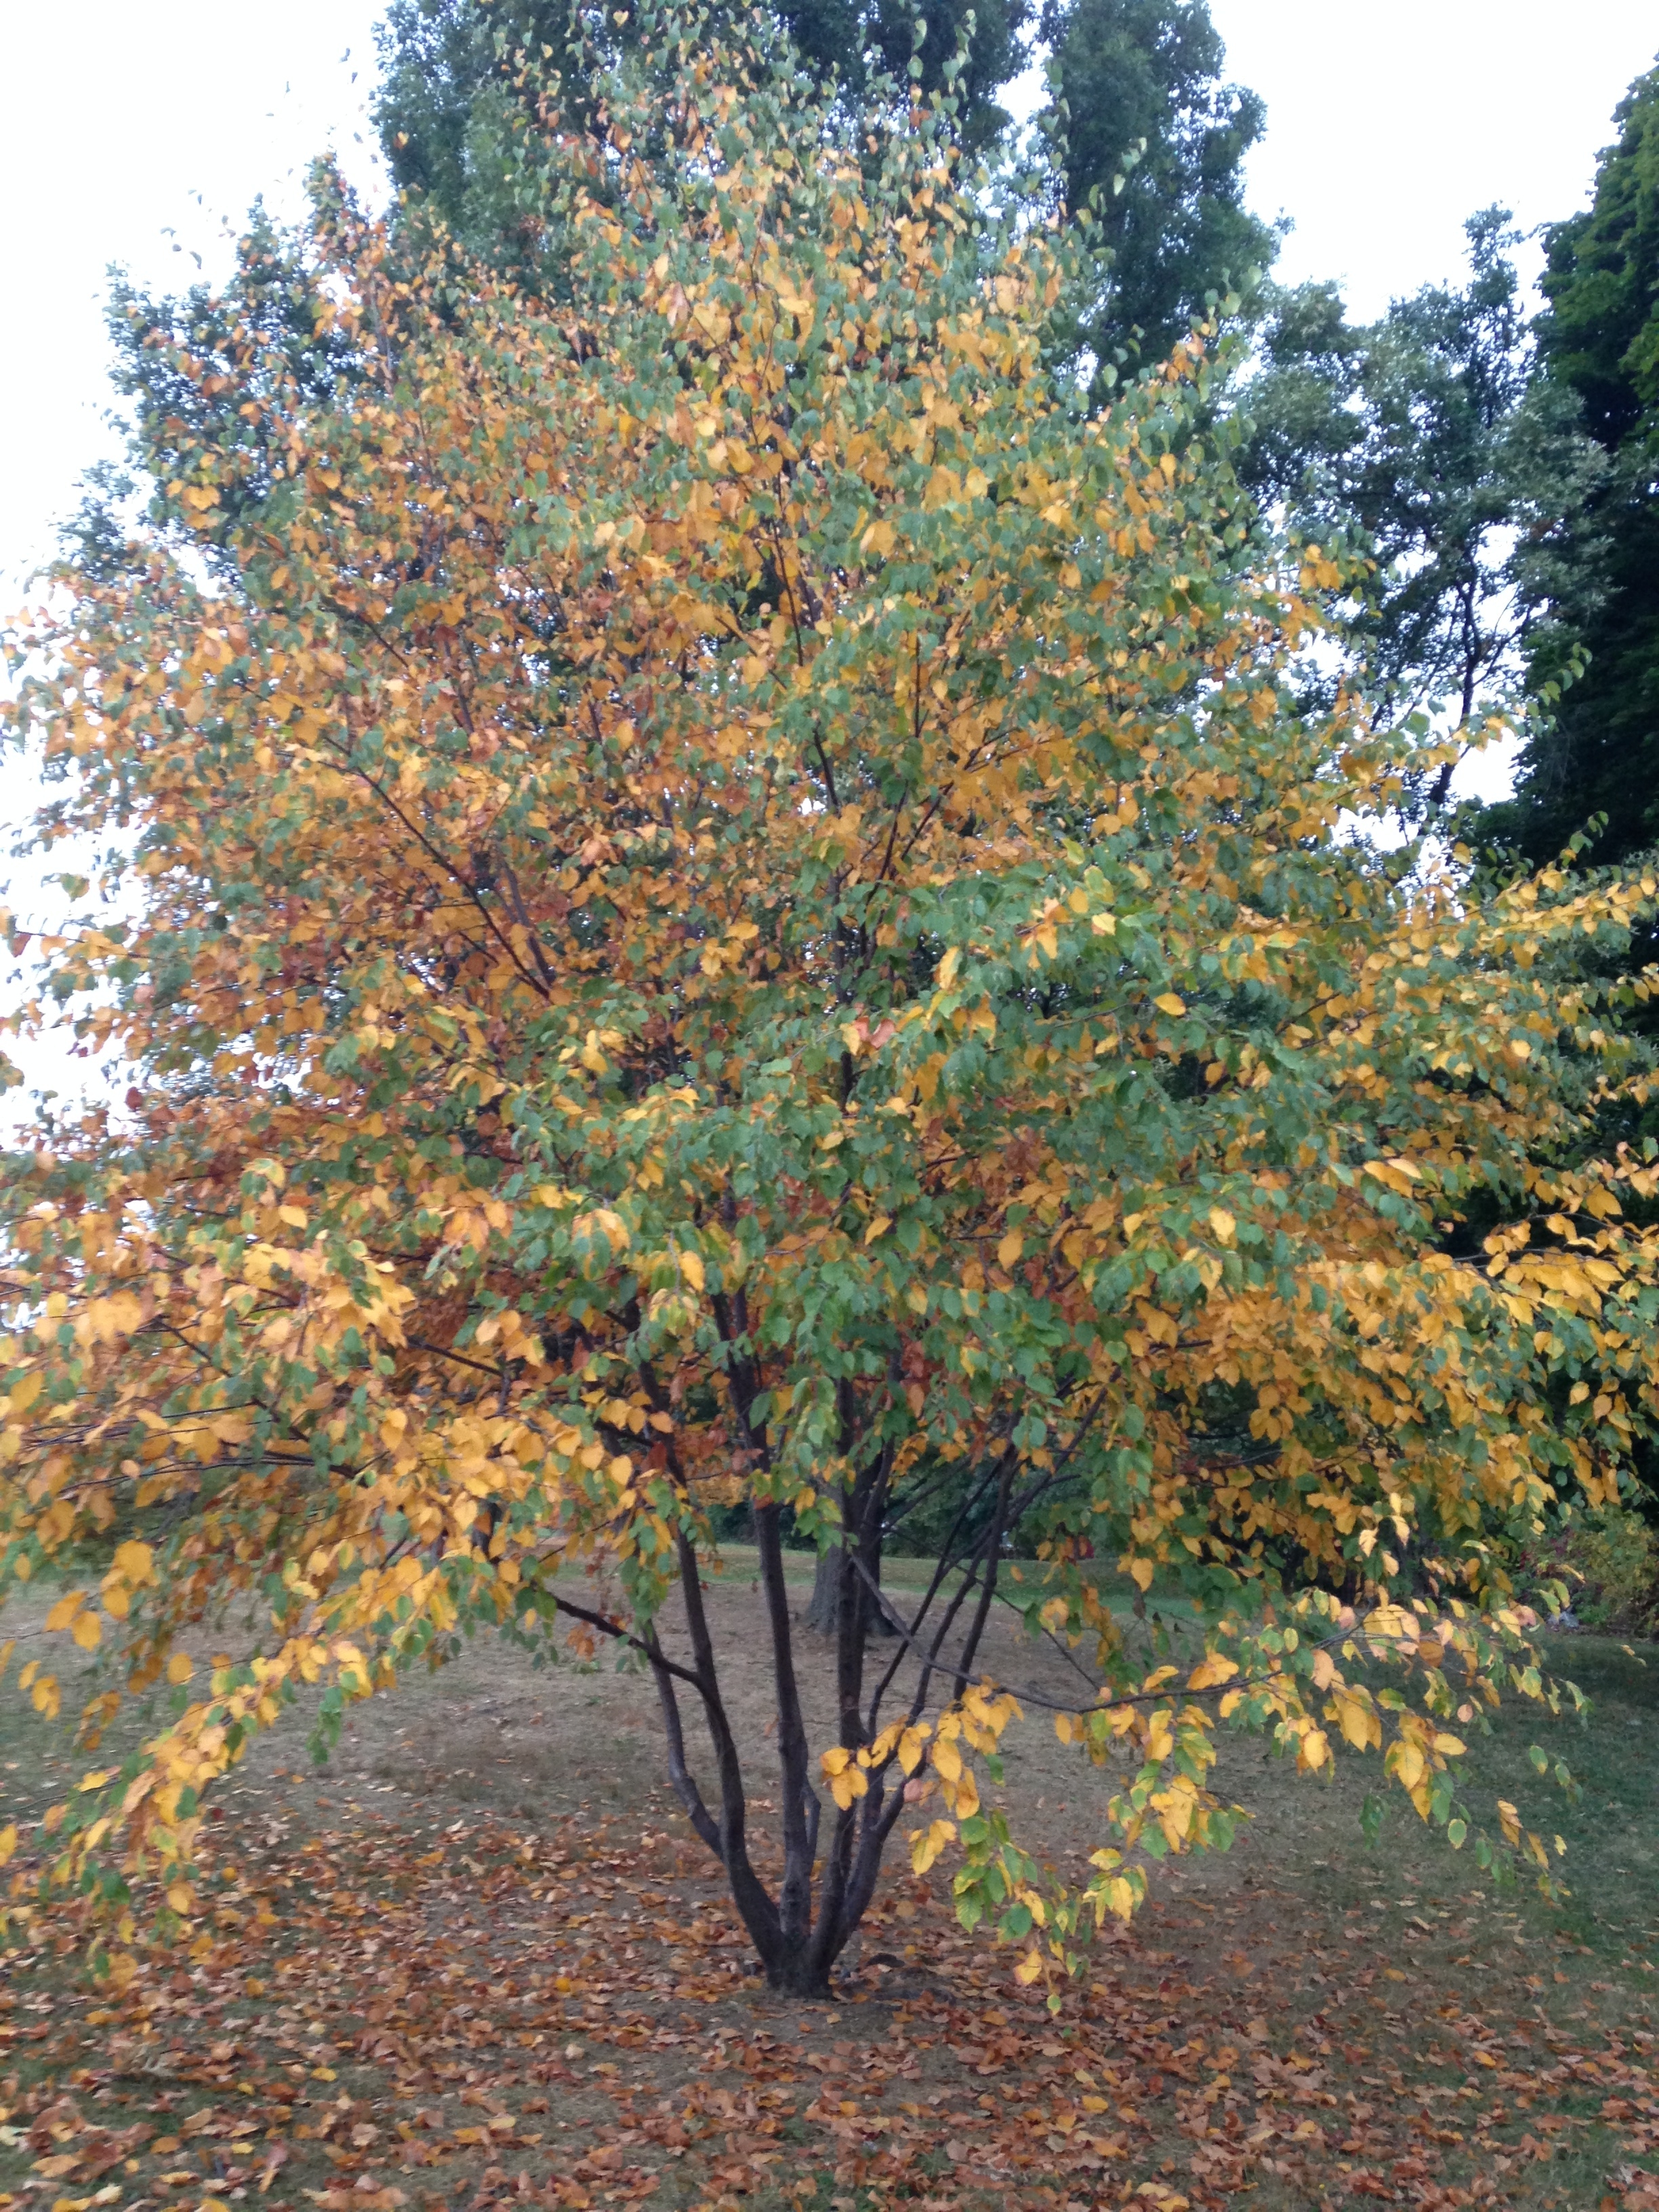 A Young Black Birch Tree in Early Fall